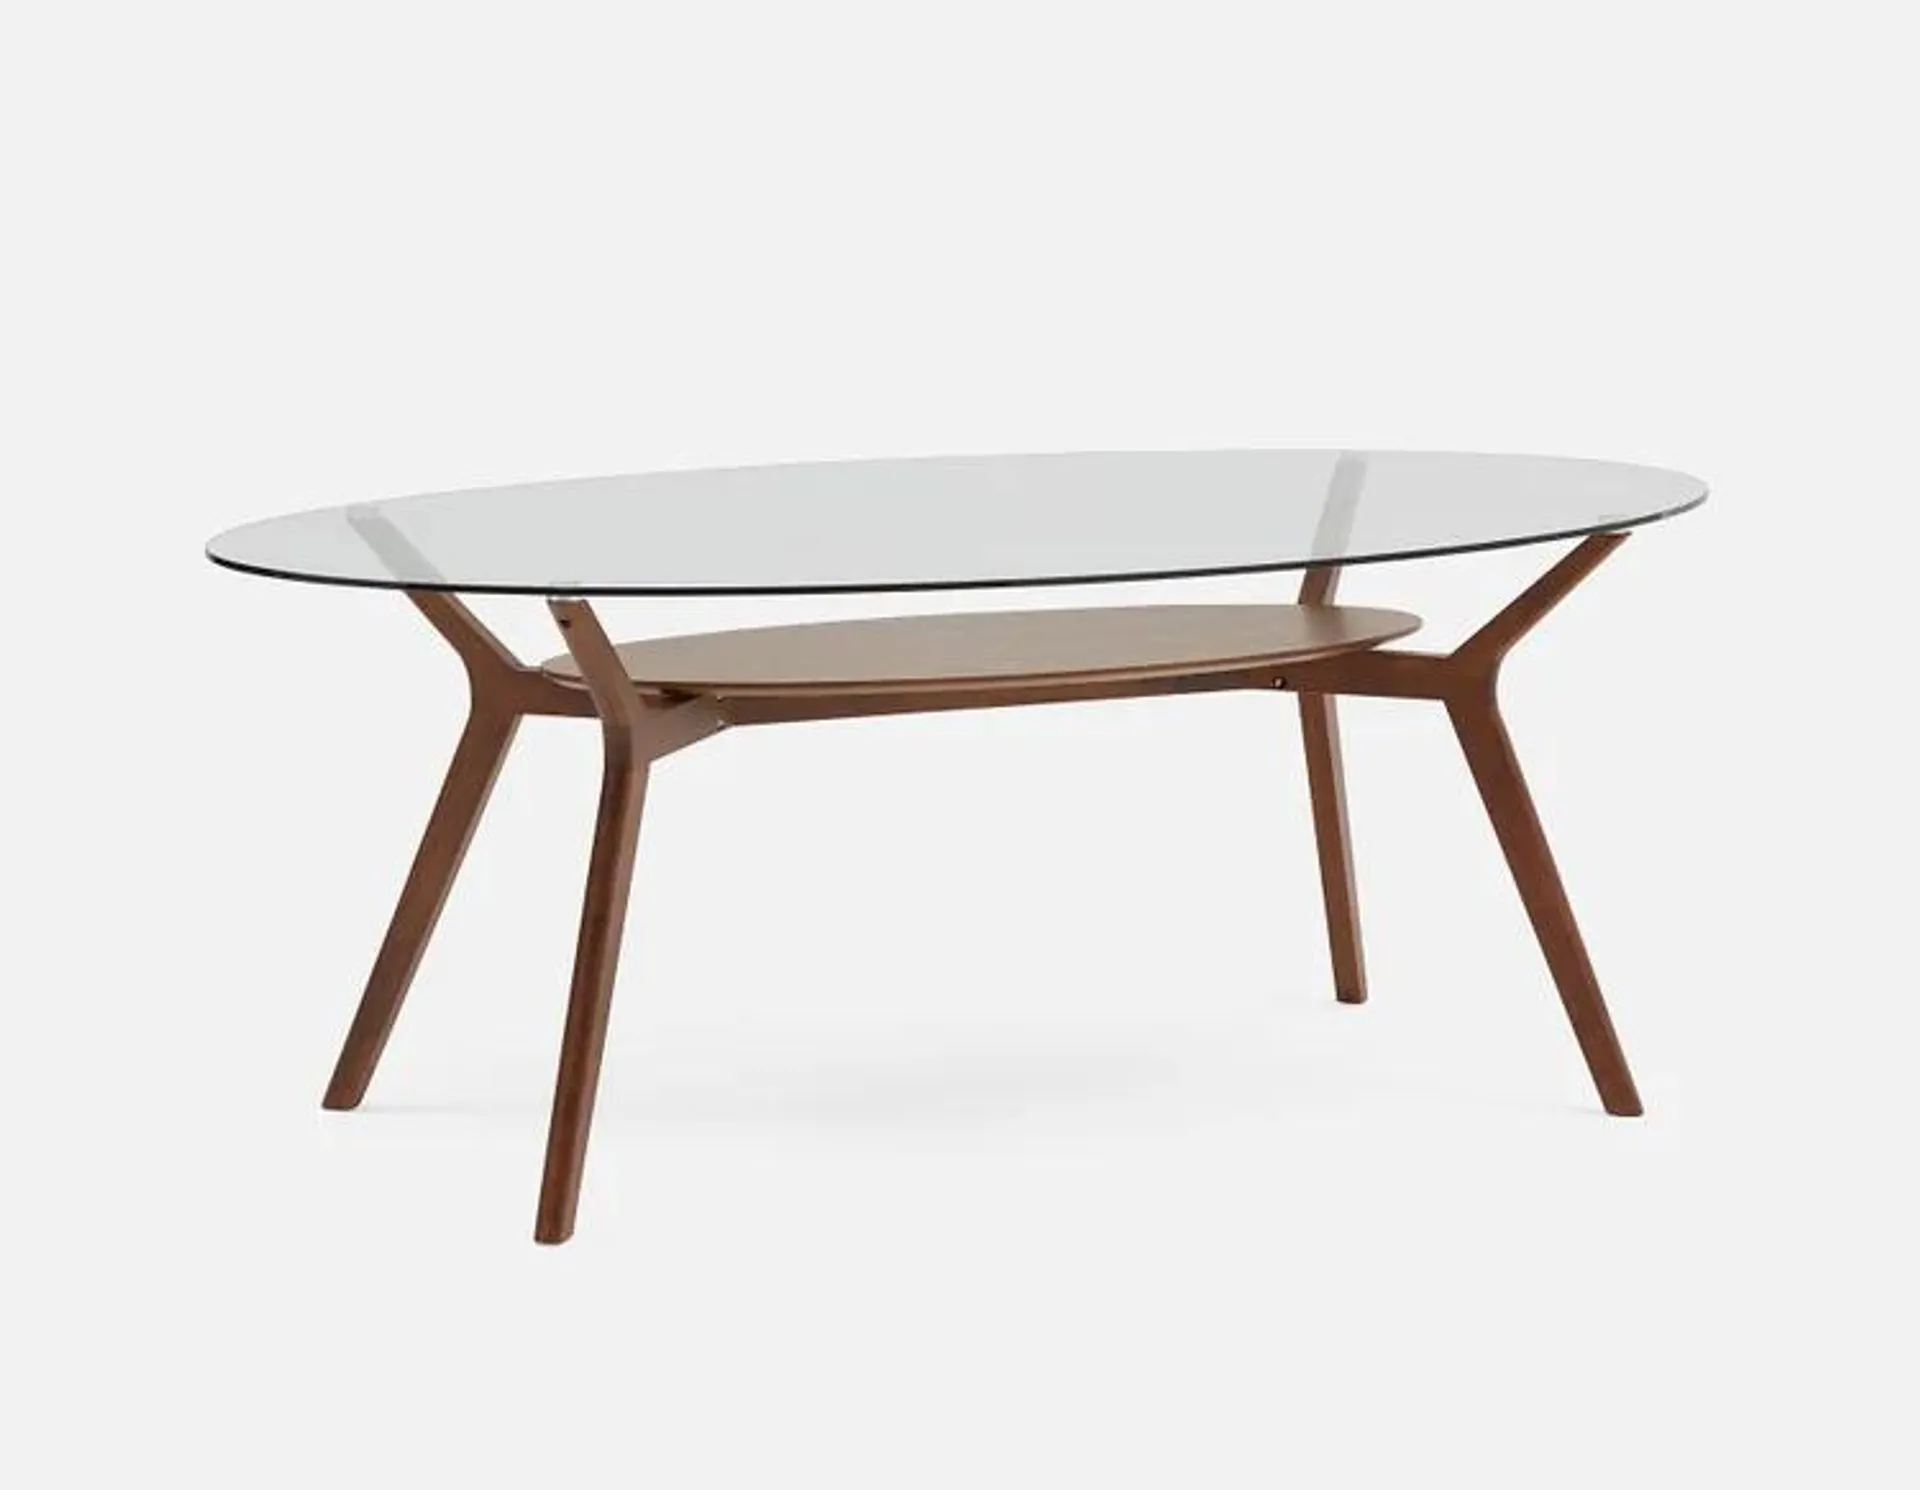 ODENSE ash veneer Dining Table with tempered glass top 200 cm